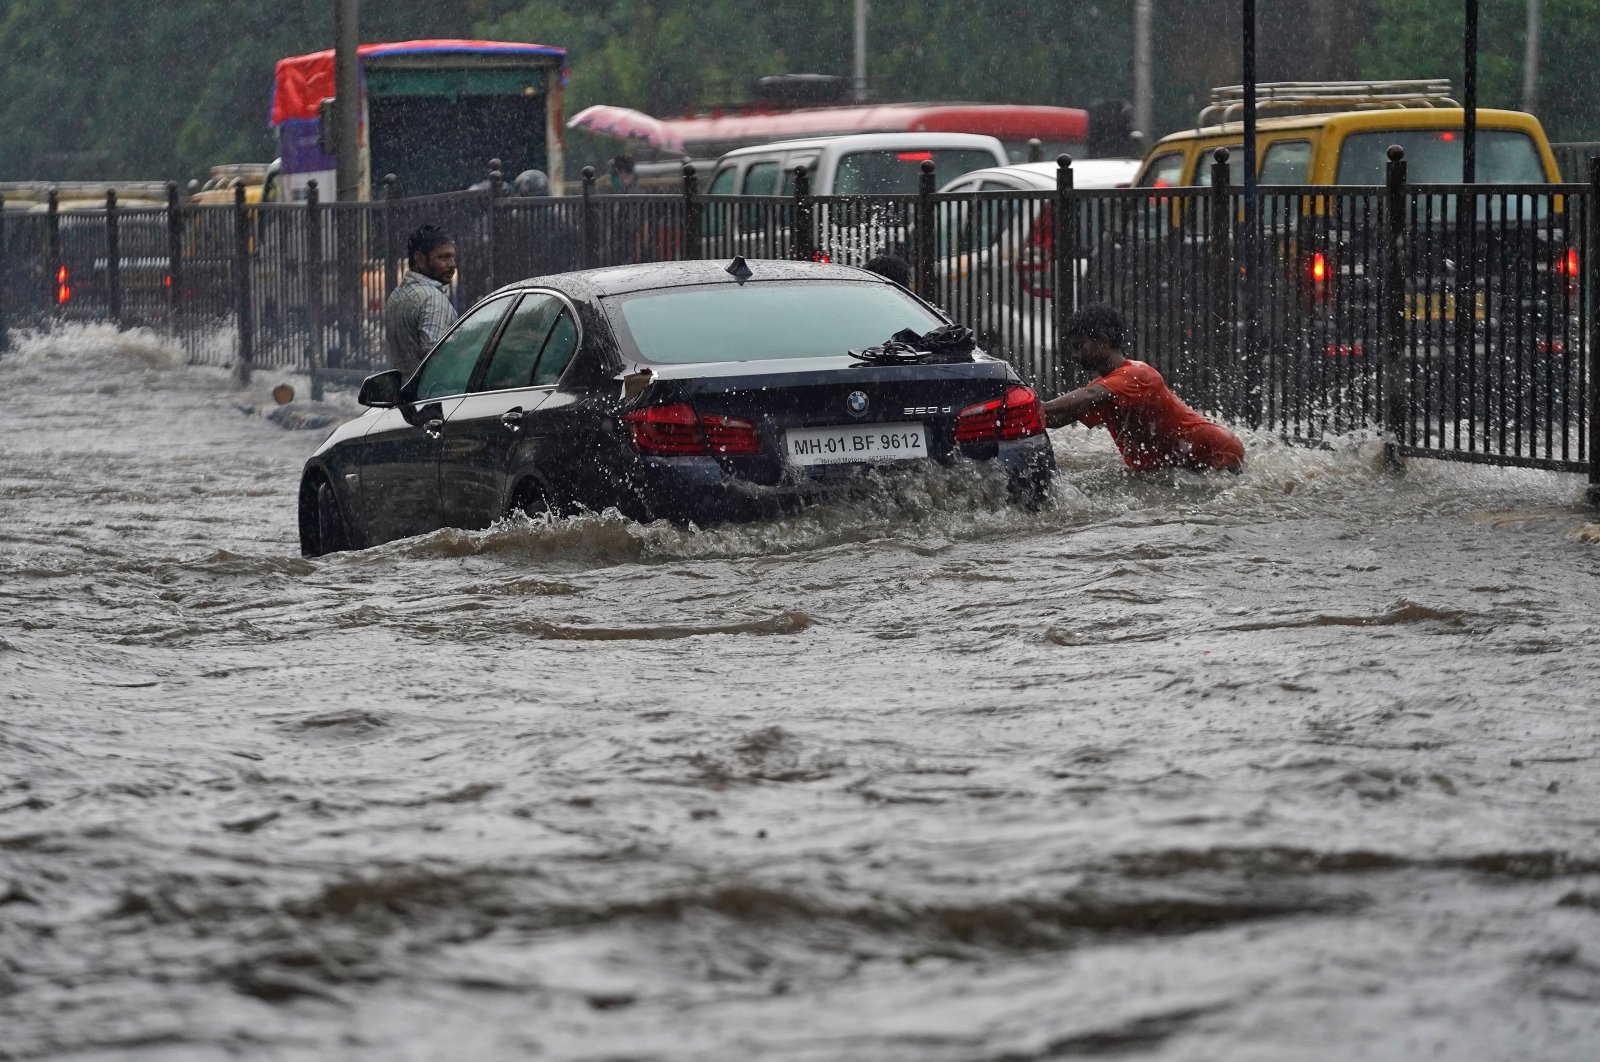 A man pushes a car, stuck in a flooded road, during heavy rains in Mumbai, India, July 4, 2020. (Reuters Photo)